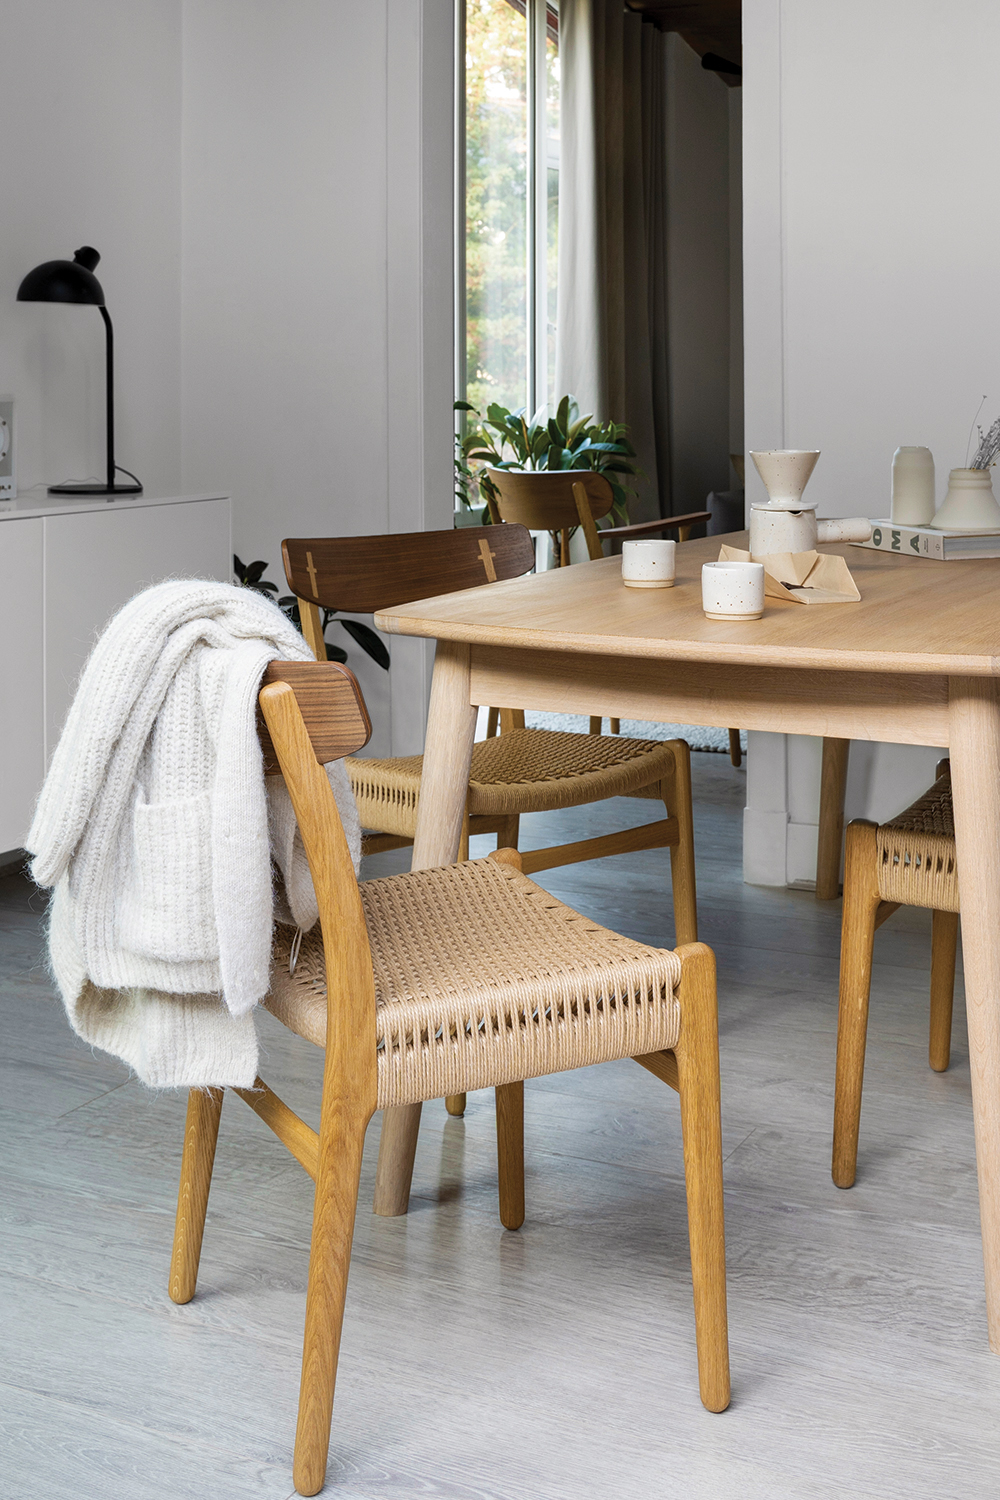 bright, airy modernist dining room with Carl Hansen chairs in natural, sustainable materials